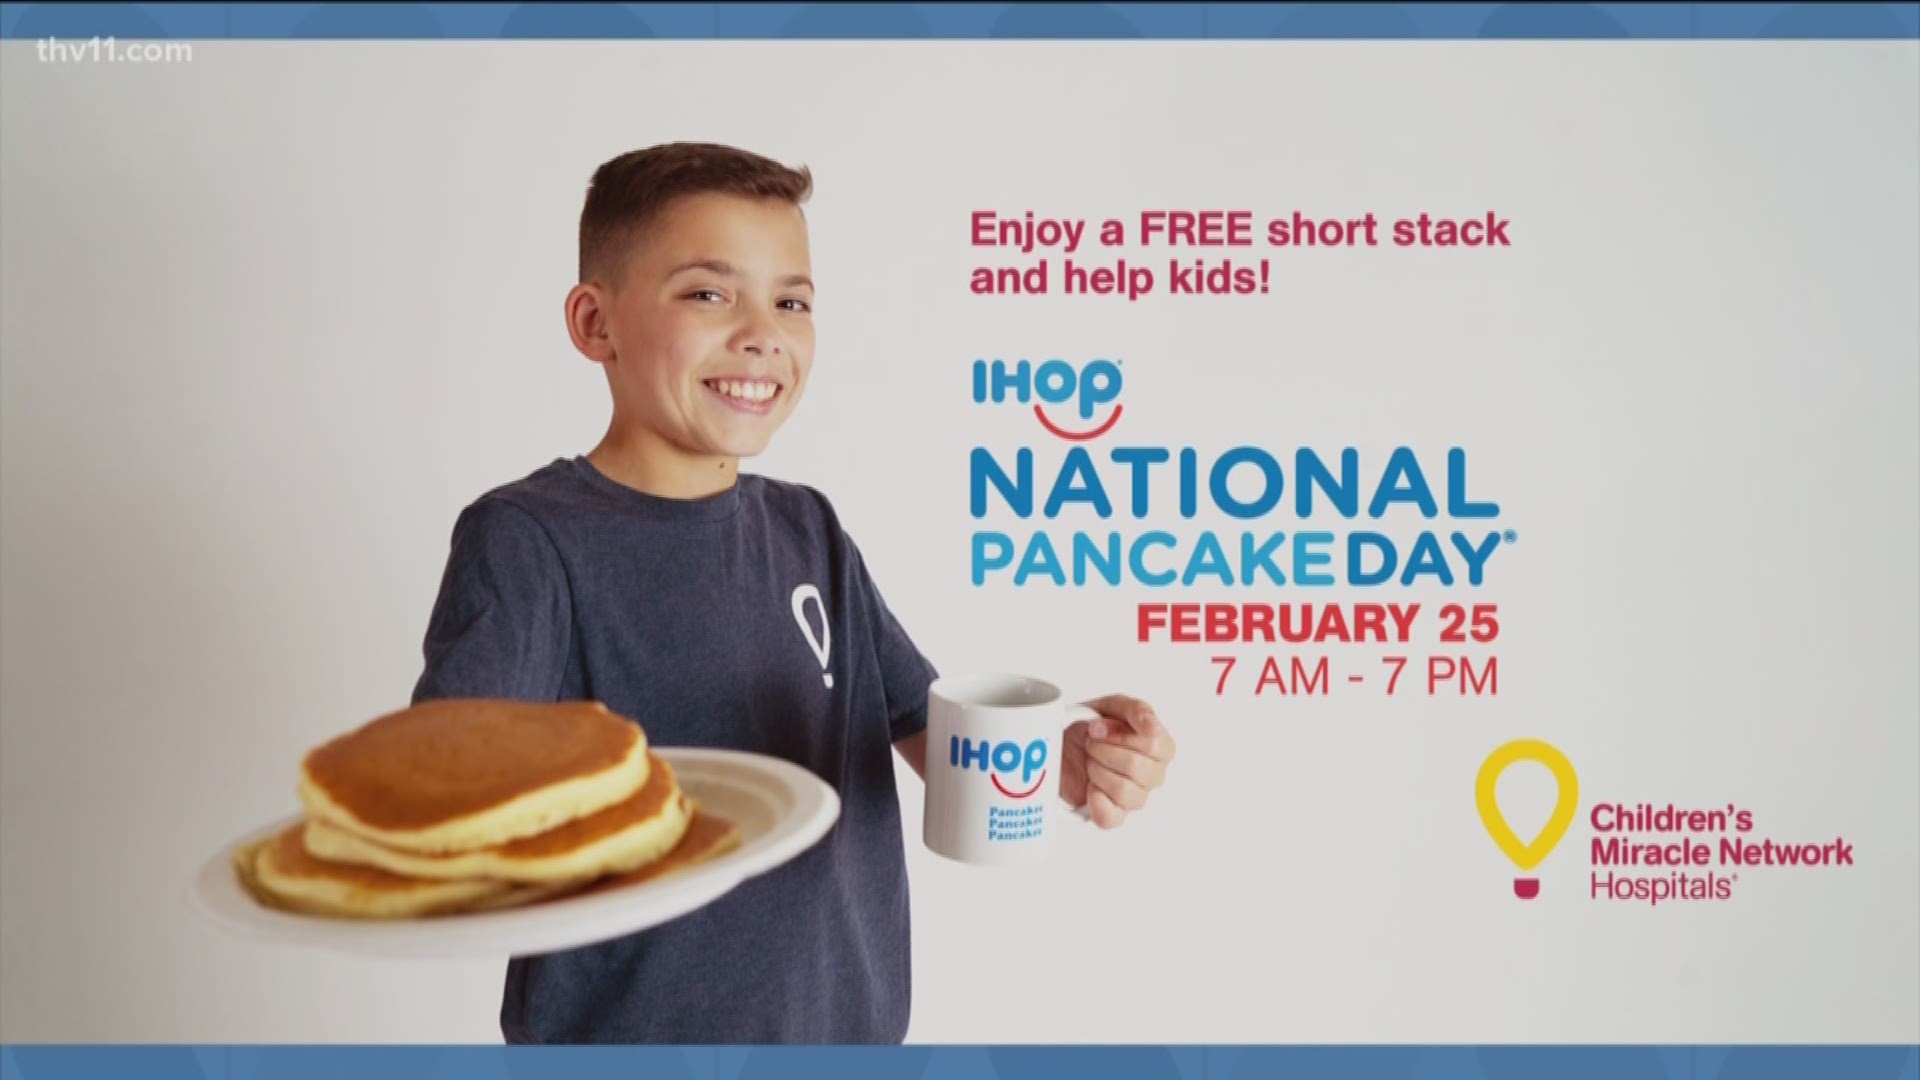 We love National Pancake Day. It's a day we can help the patients at Arkansas Children's and enjoy a free stack of pancakes!